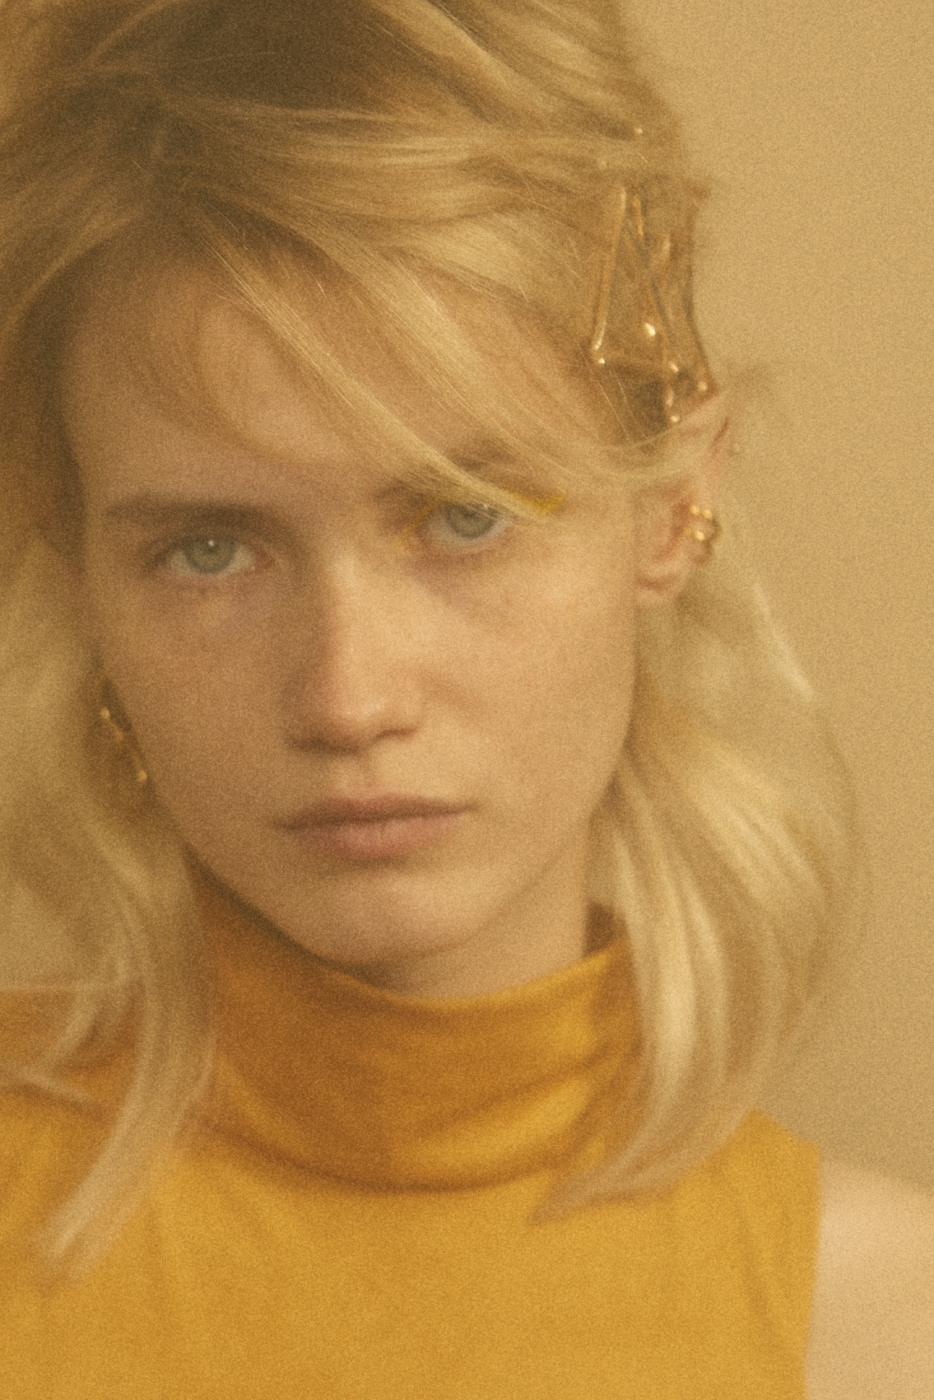 EDITORIAL: YELLOW TEST STYLED BY KAS KRYST